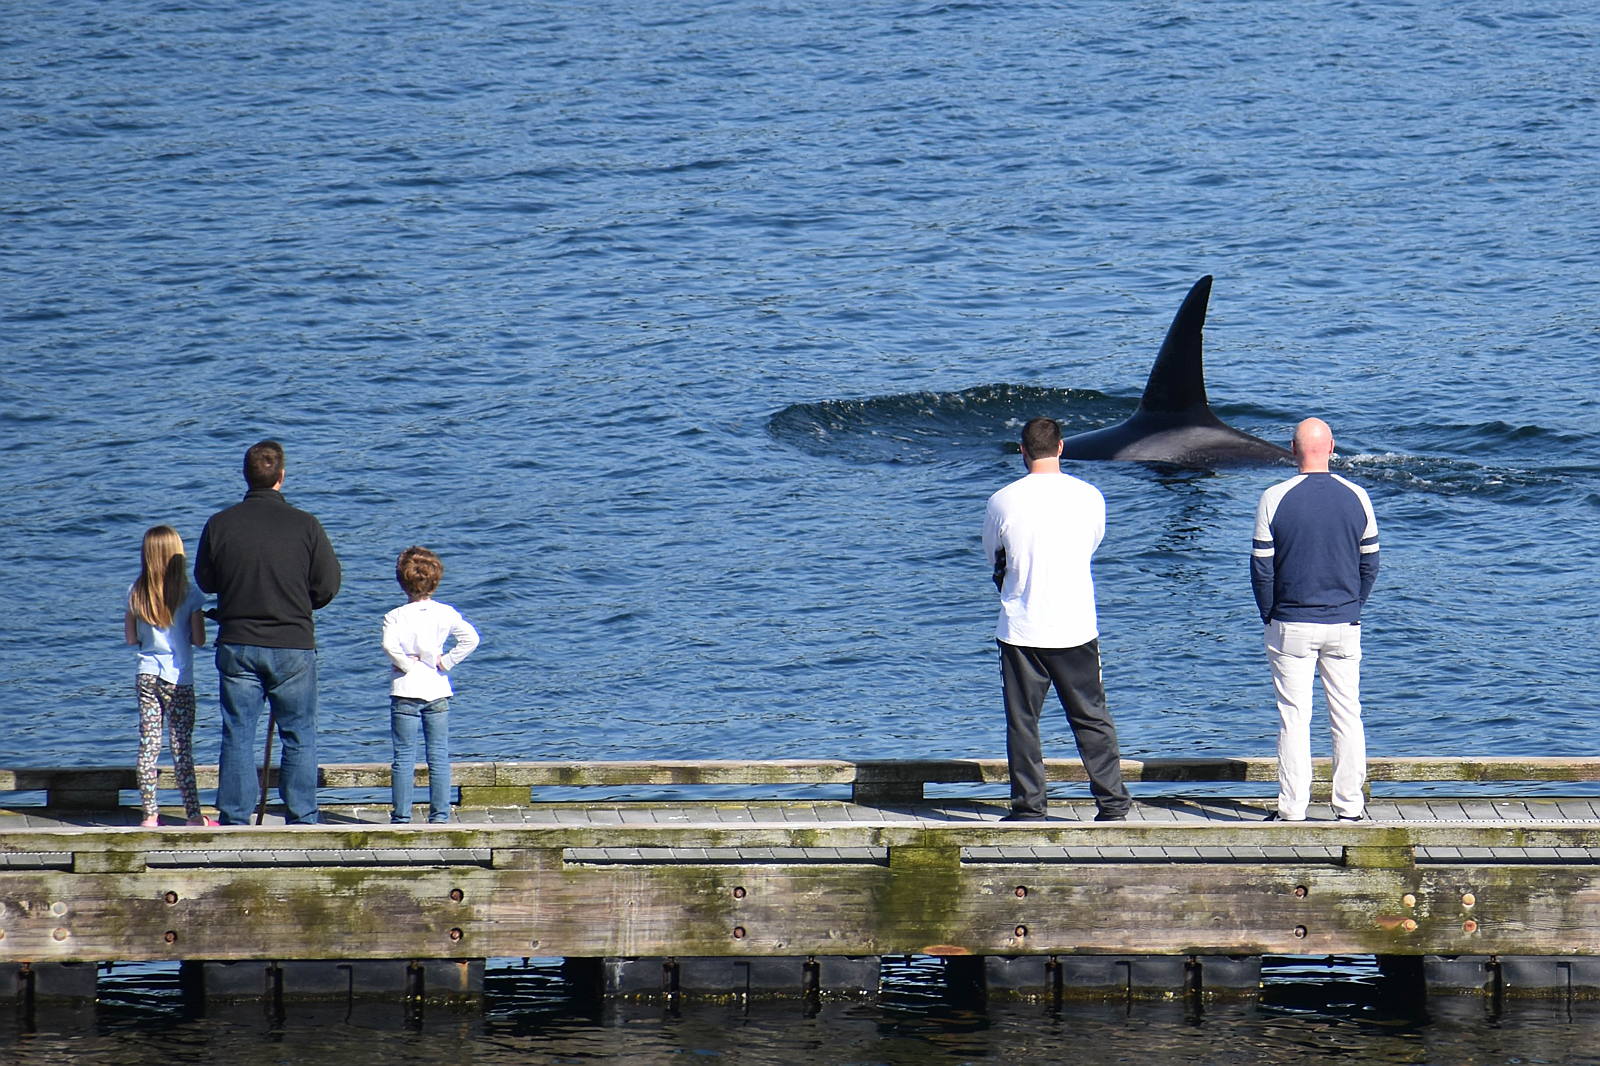 Photo by Orca Network - Shore-based whale watching at its best!